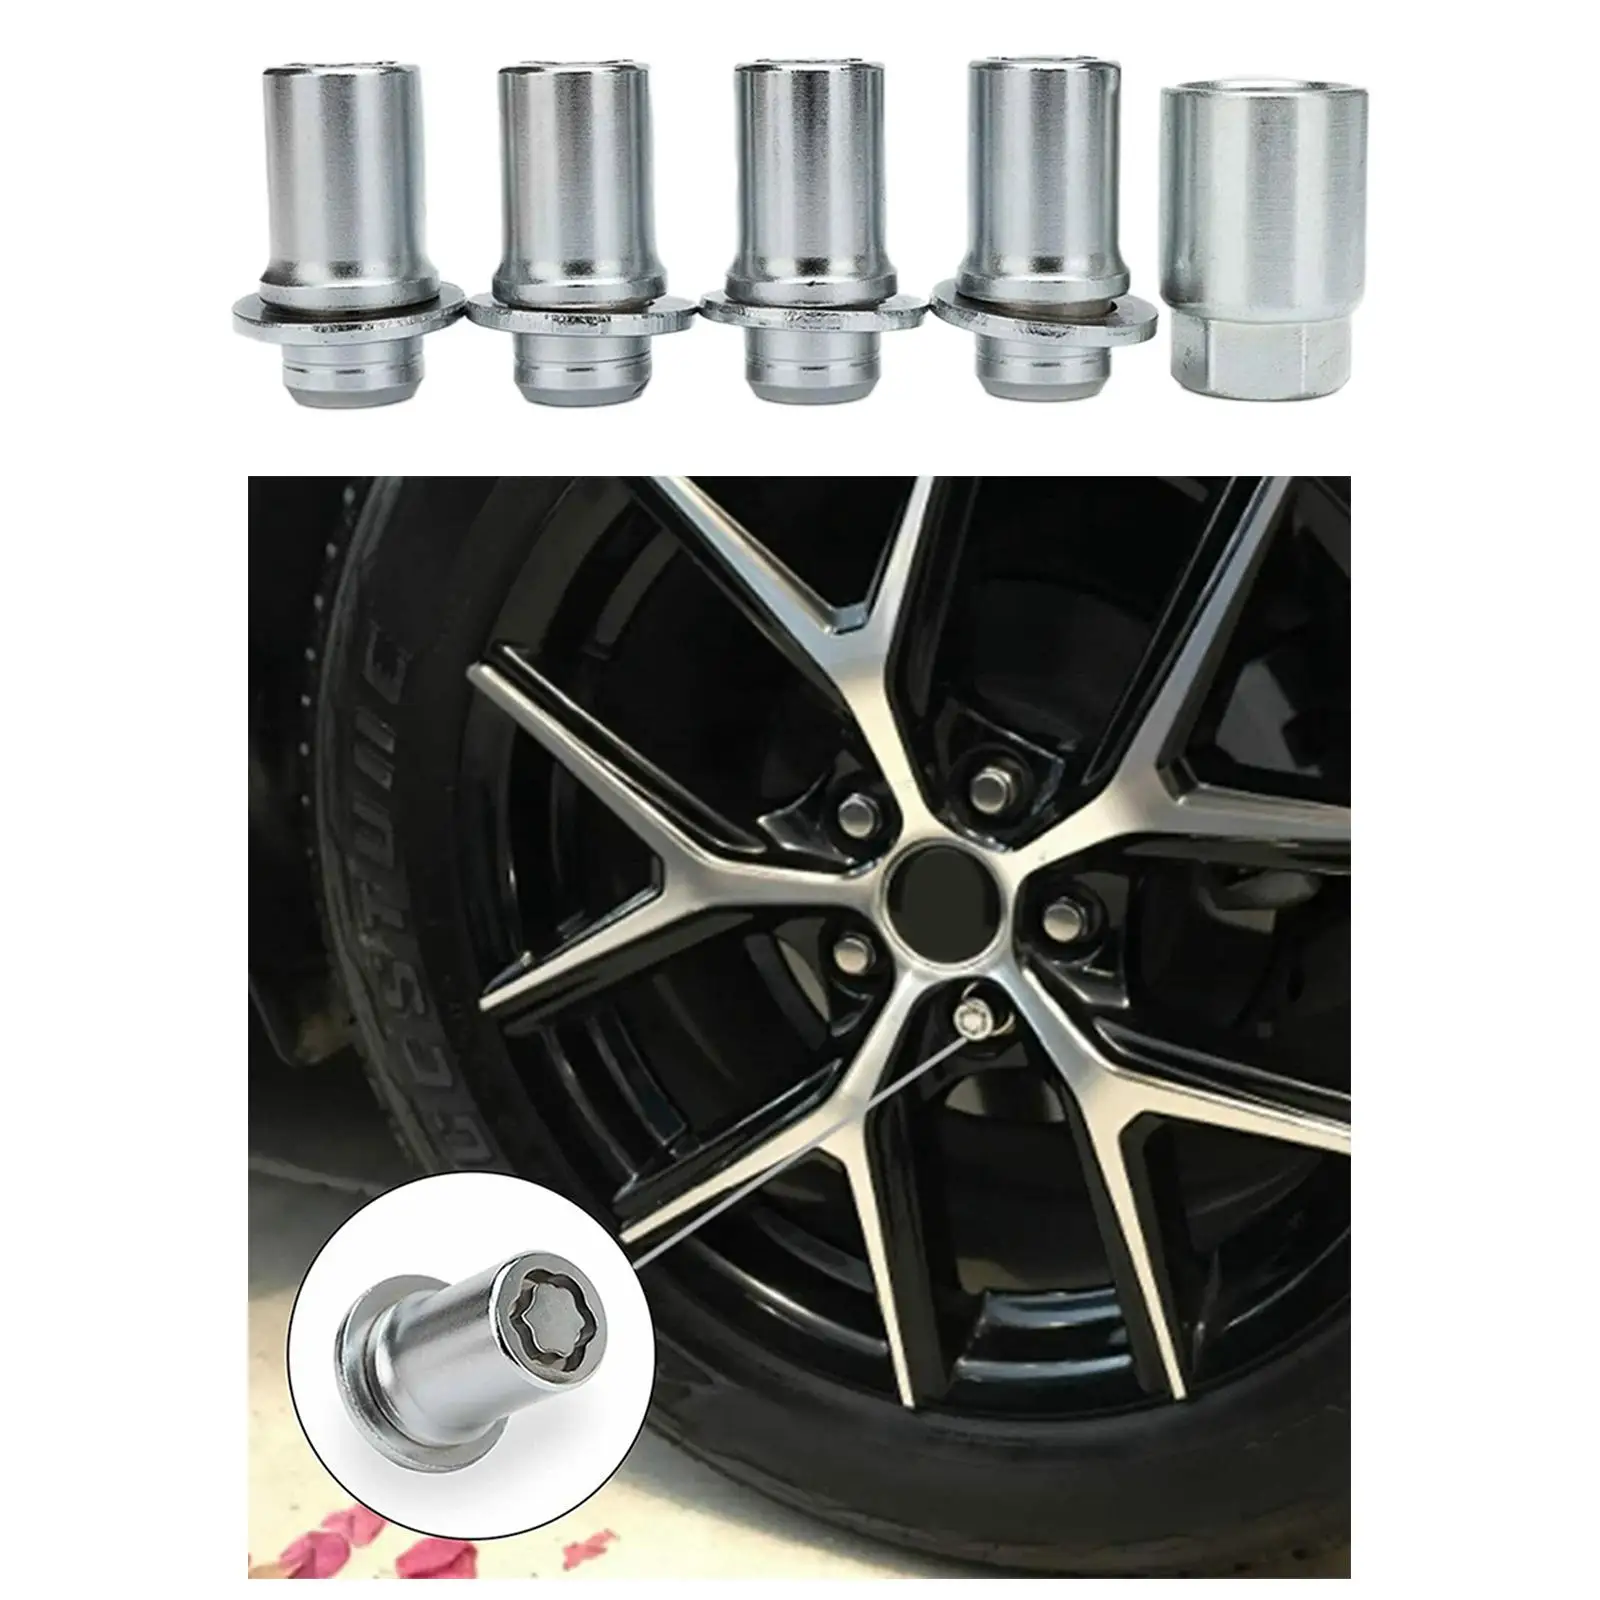 5 Pieces Car Wheel Lock Lug Nut Set 00276-00901 Anti Theft M12x1.5 Replace for 4RUNNER Corolla for HIGHLANDER Sequoia GS400